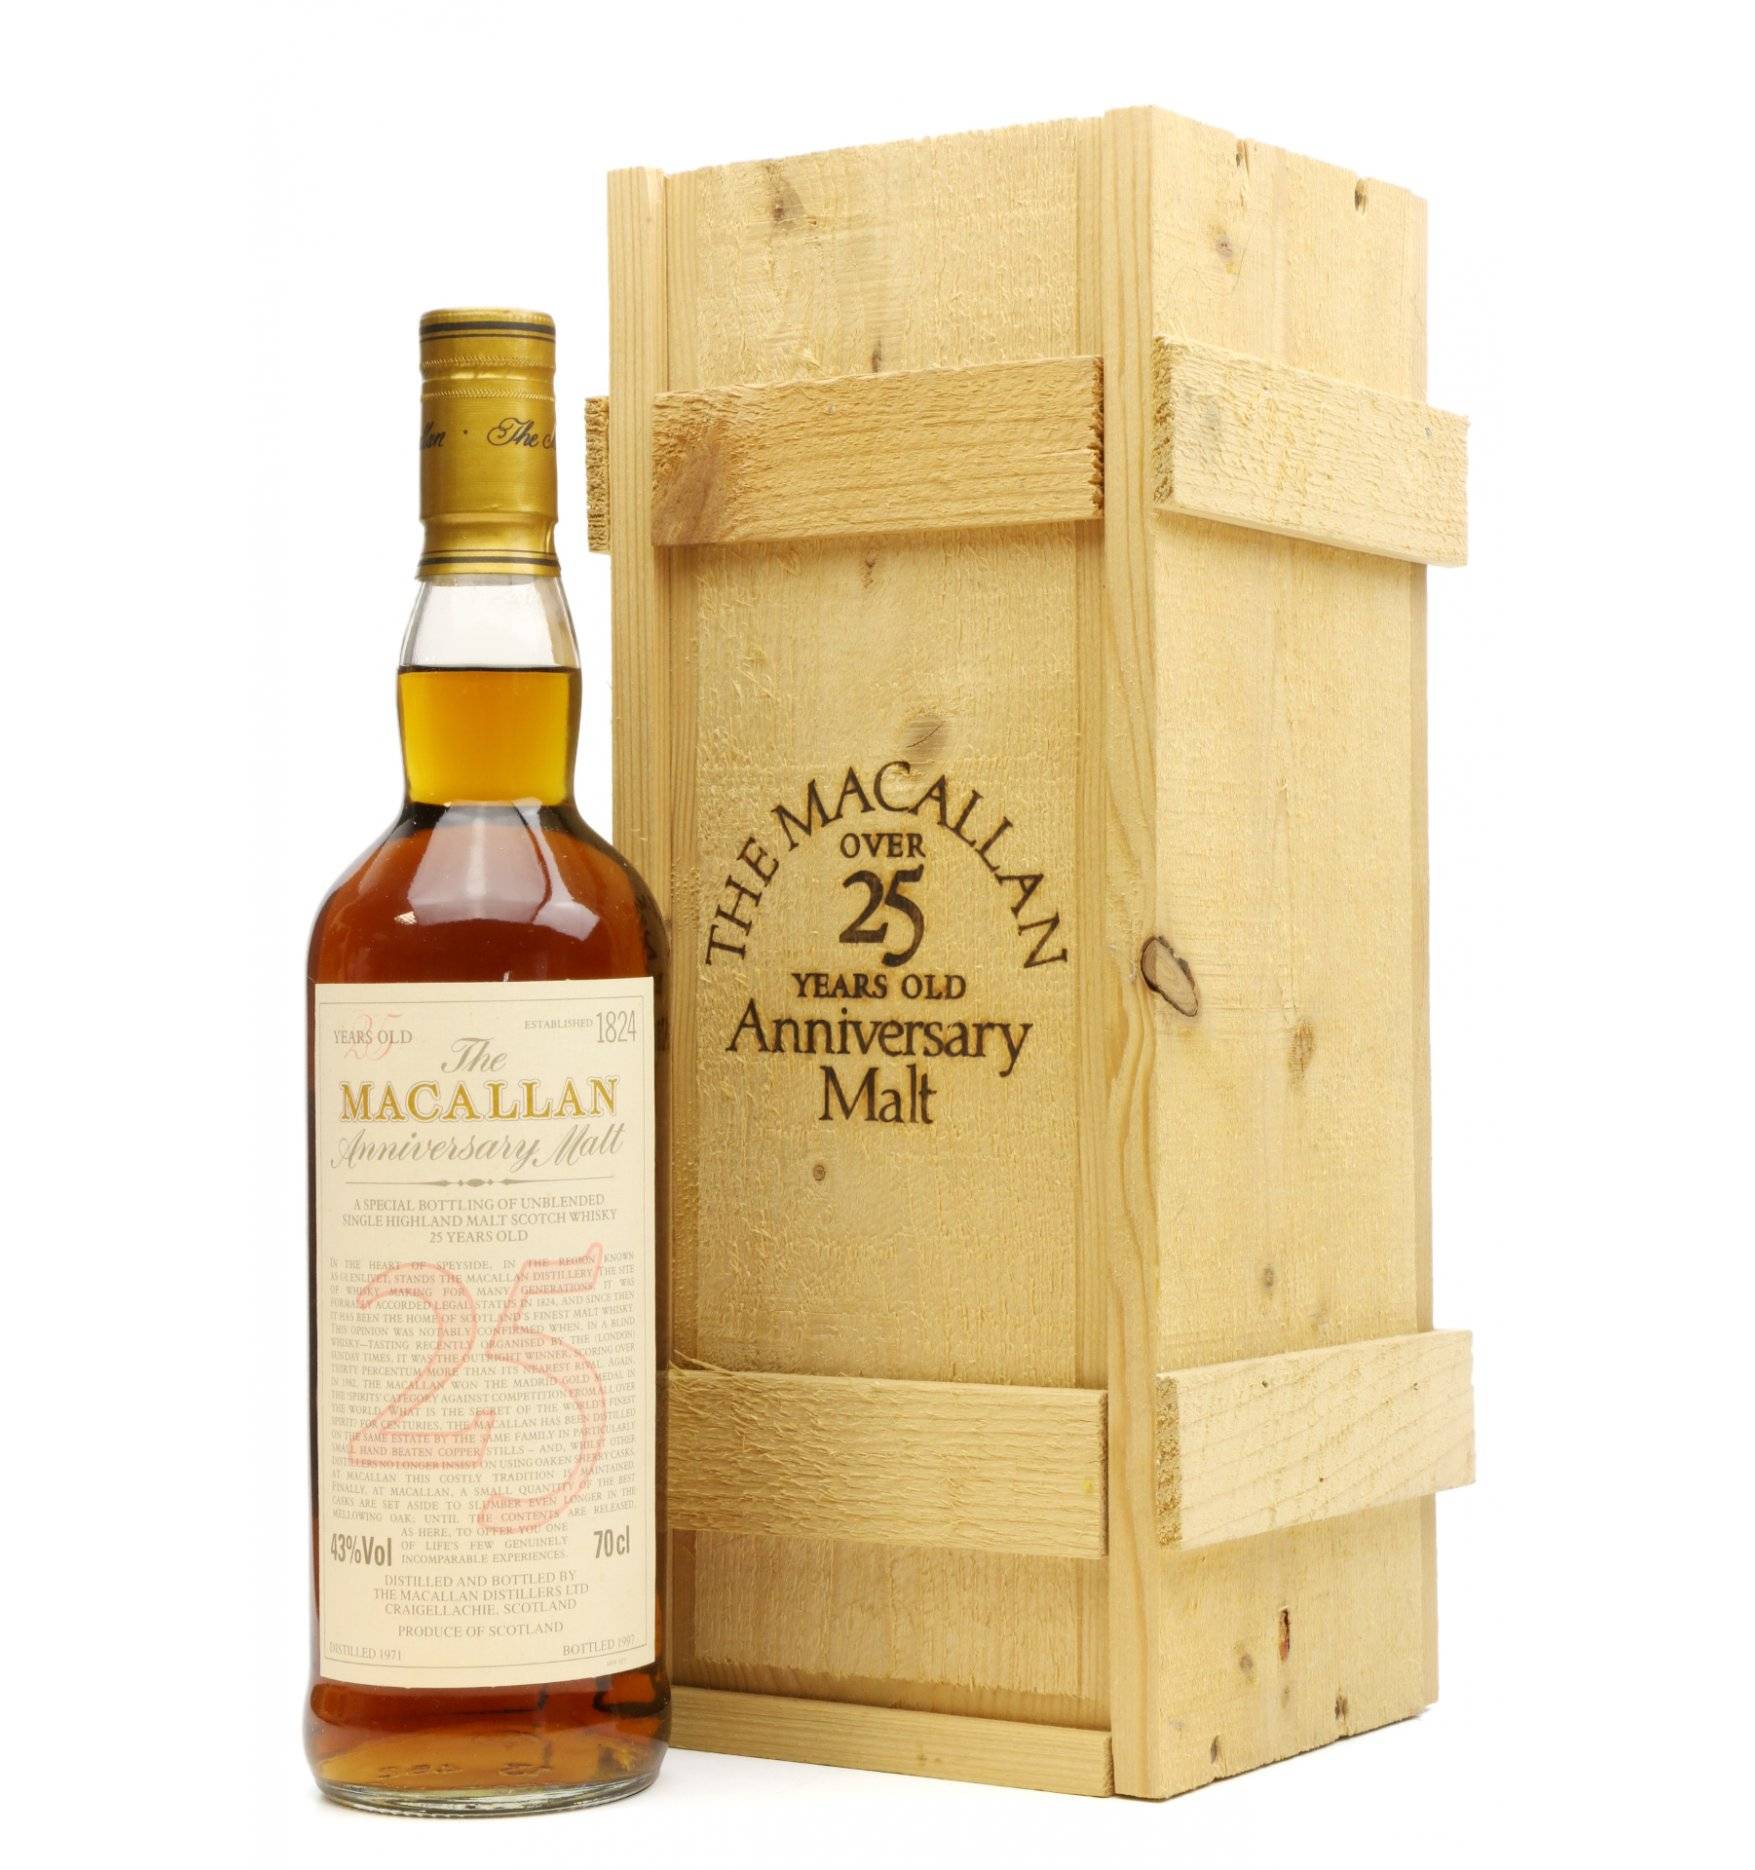 Macallan Over 25 Years Old 1971 Anniversary Malt Just Whisky Auctions